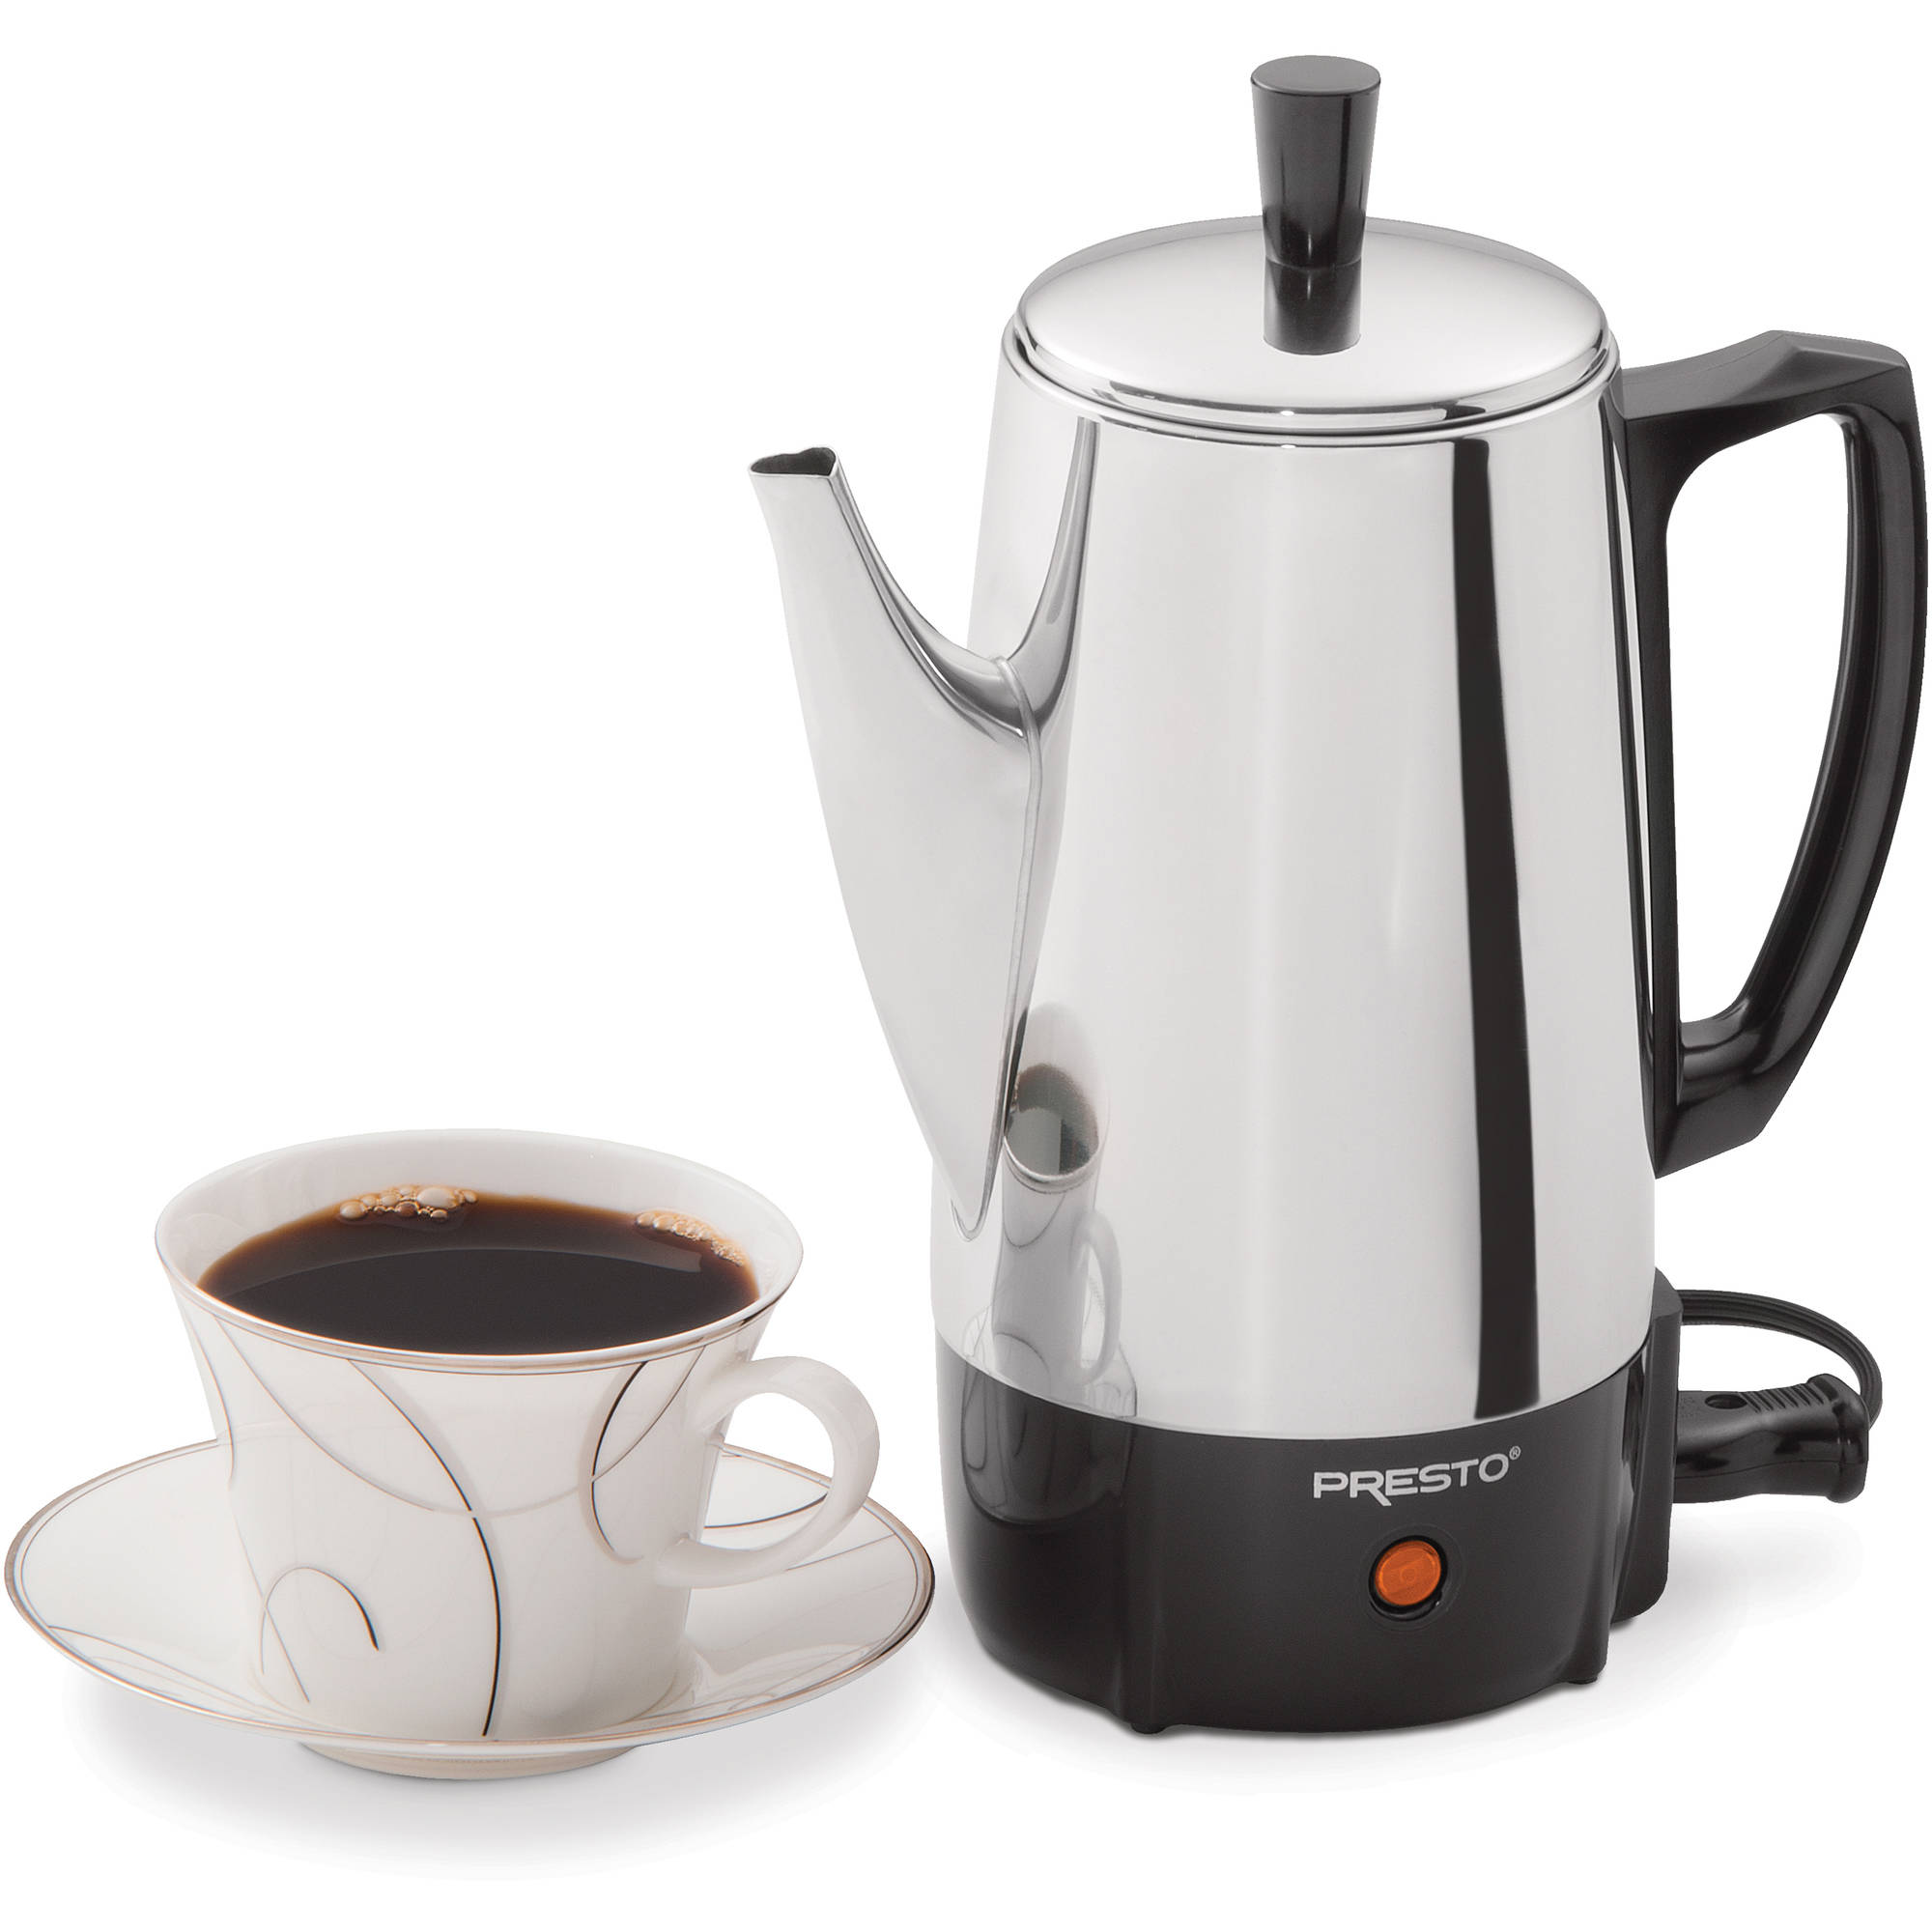 Presto® 6-Cup Capacity Stainless Steel Coffee Maker 02822 - image 1 of 10